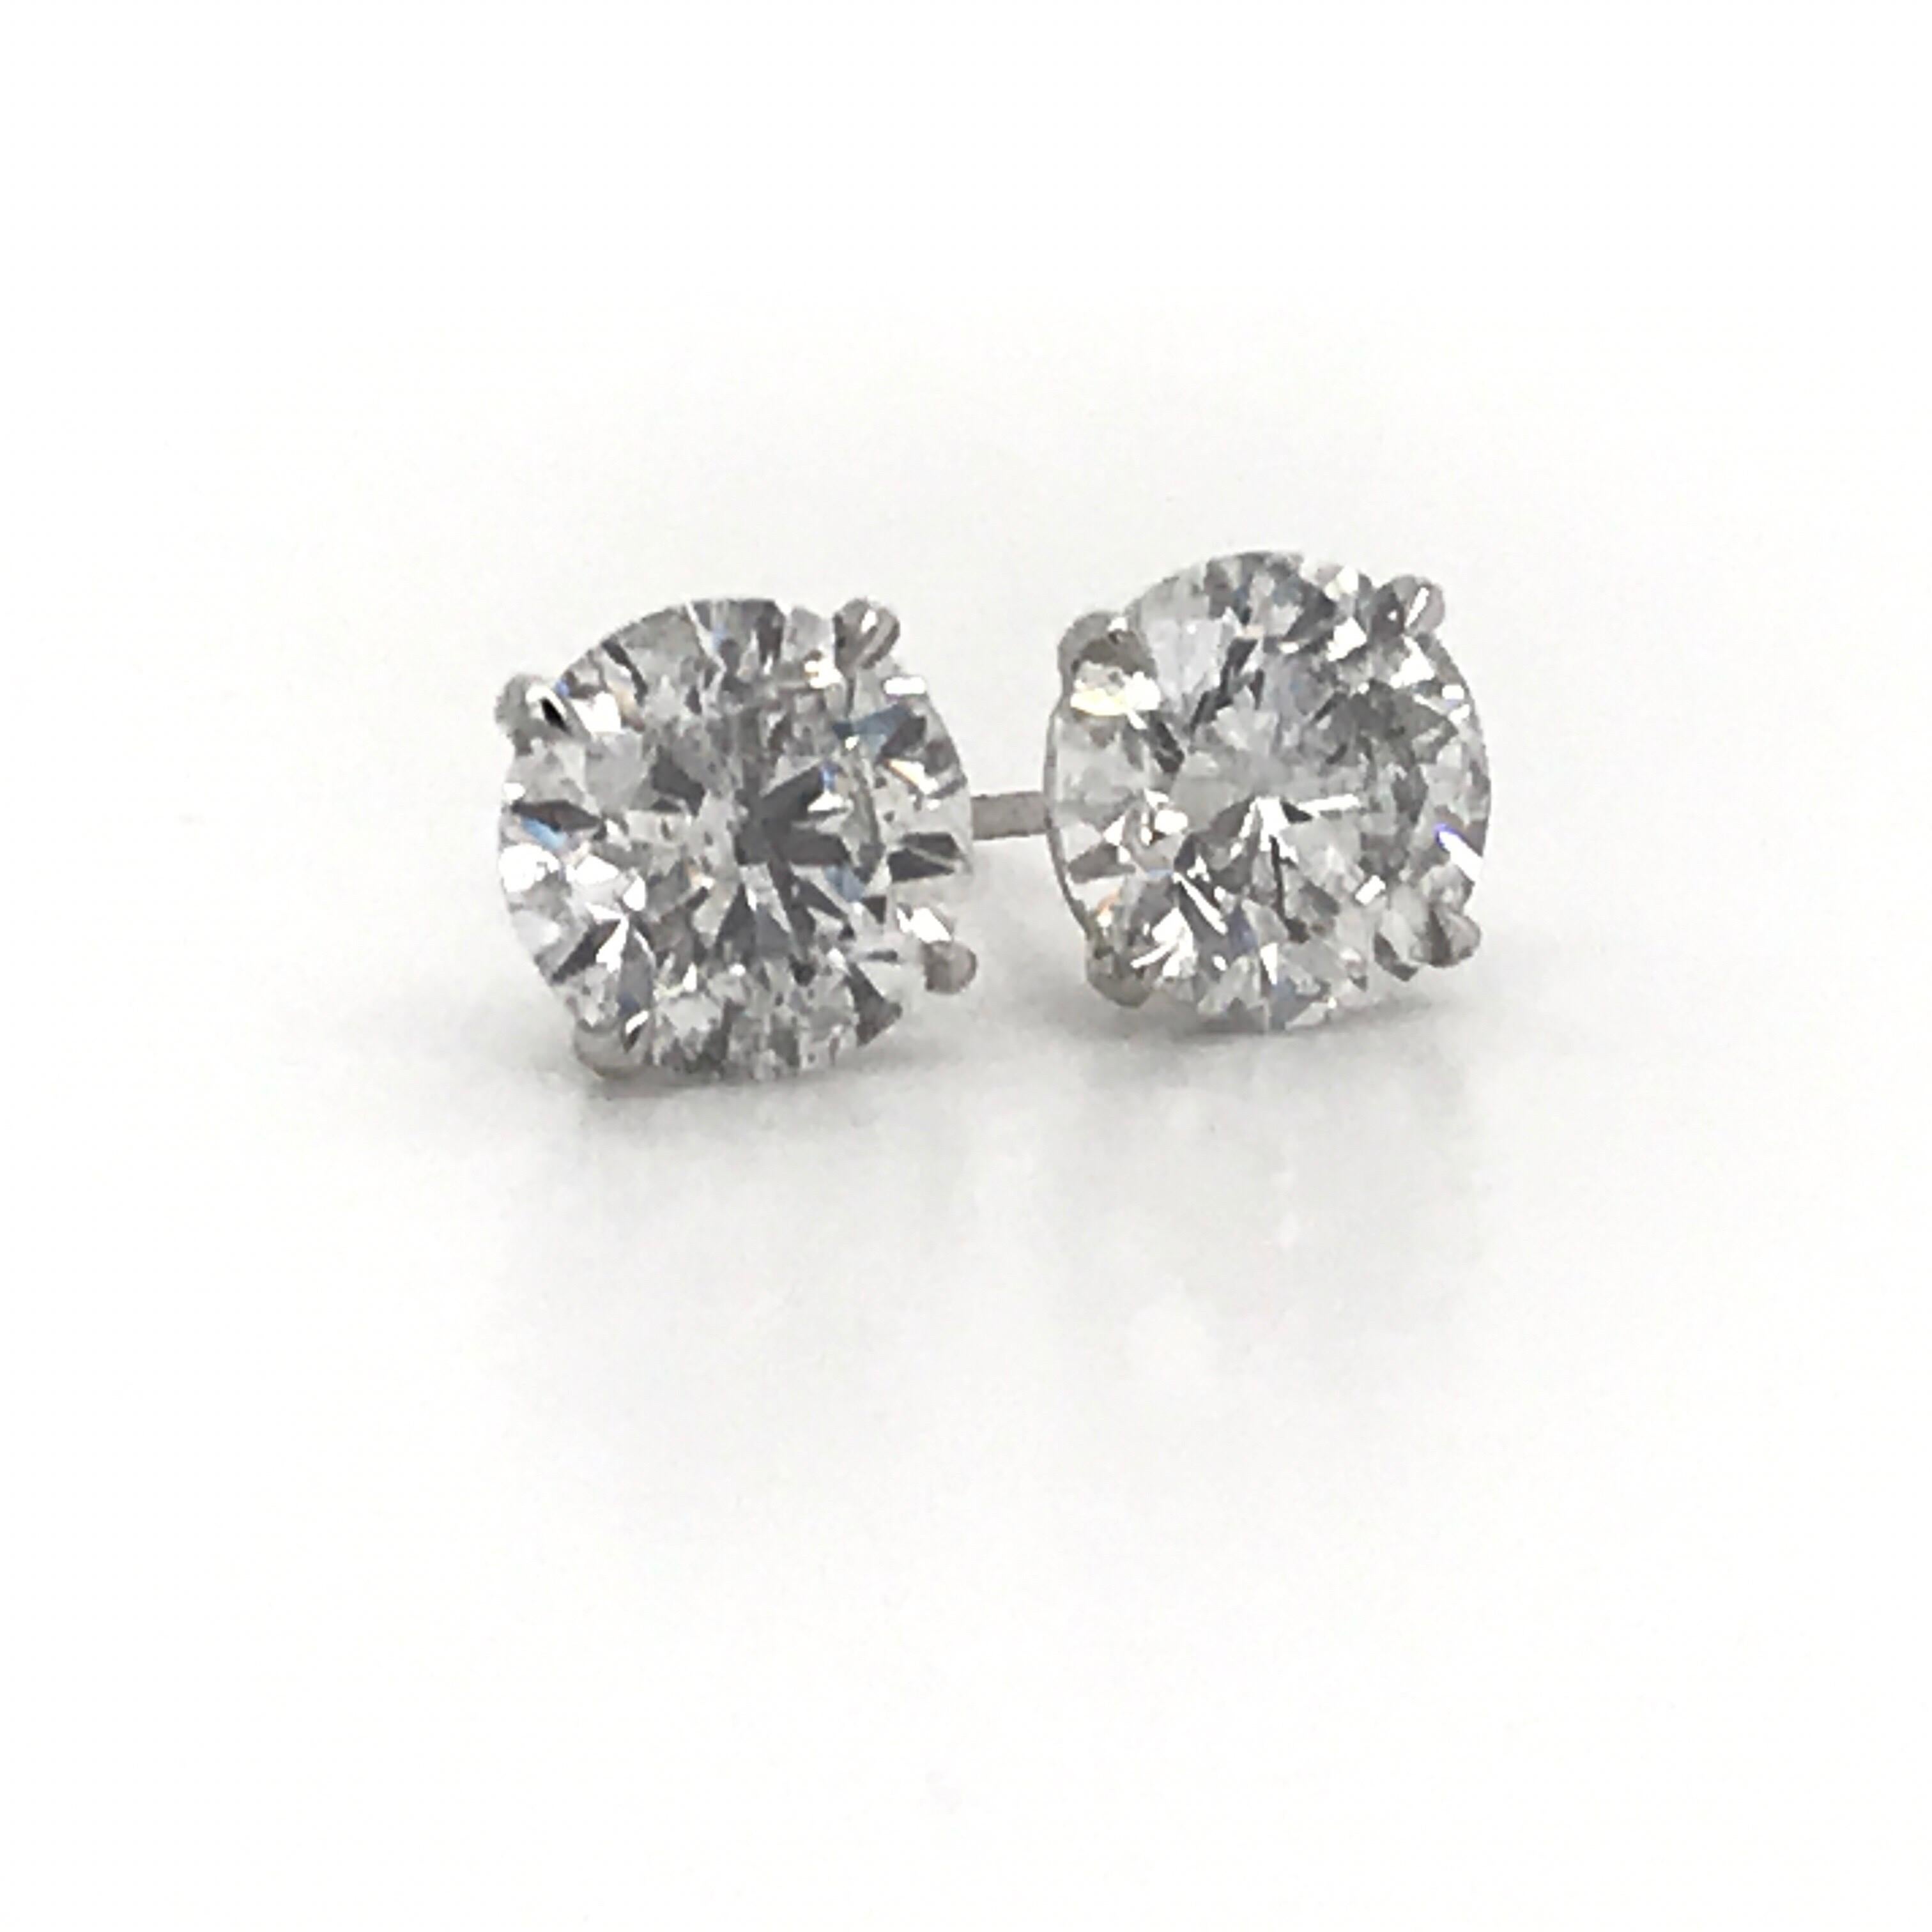 Diamond stud earrings weighing 4.07 Carats in 18K white gold 4 prong champagne studs.
Color I 
Clarity I1 
